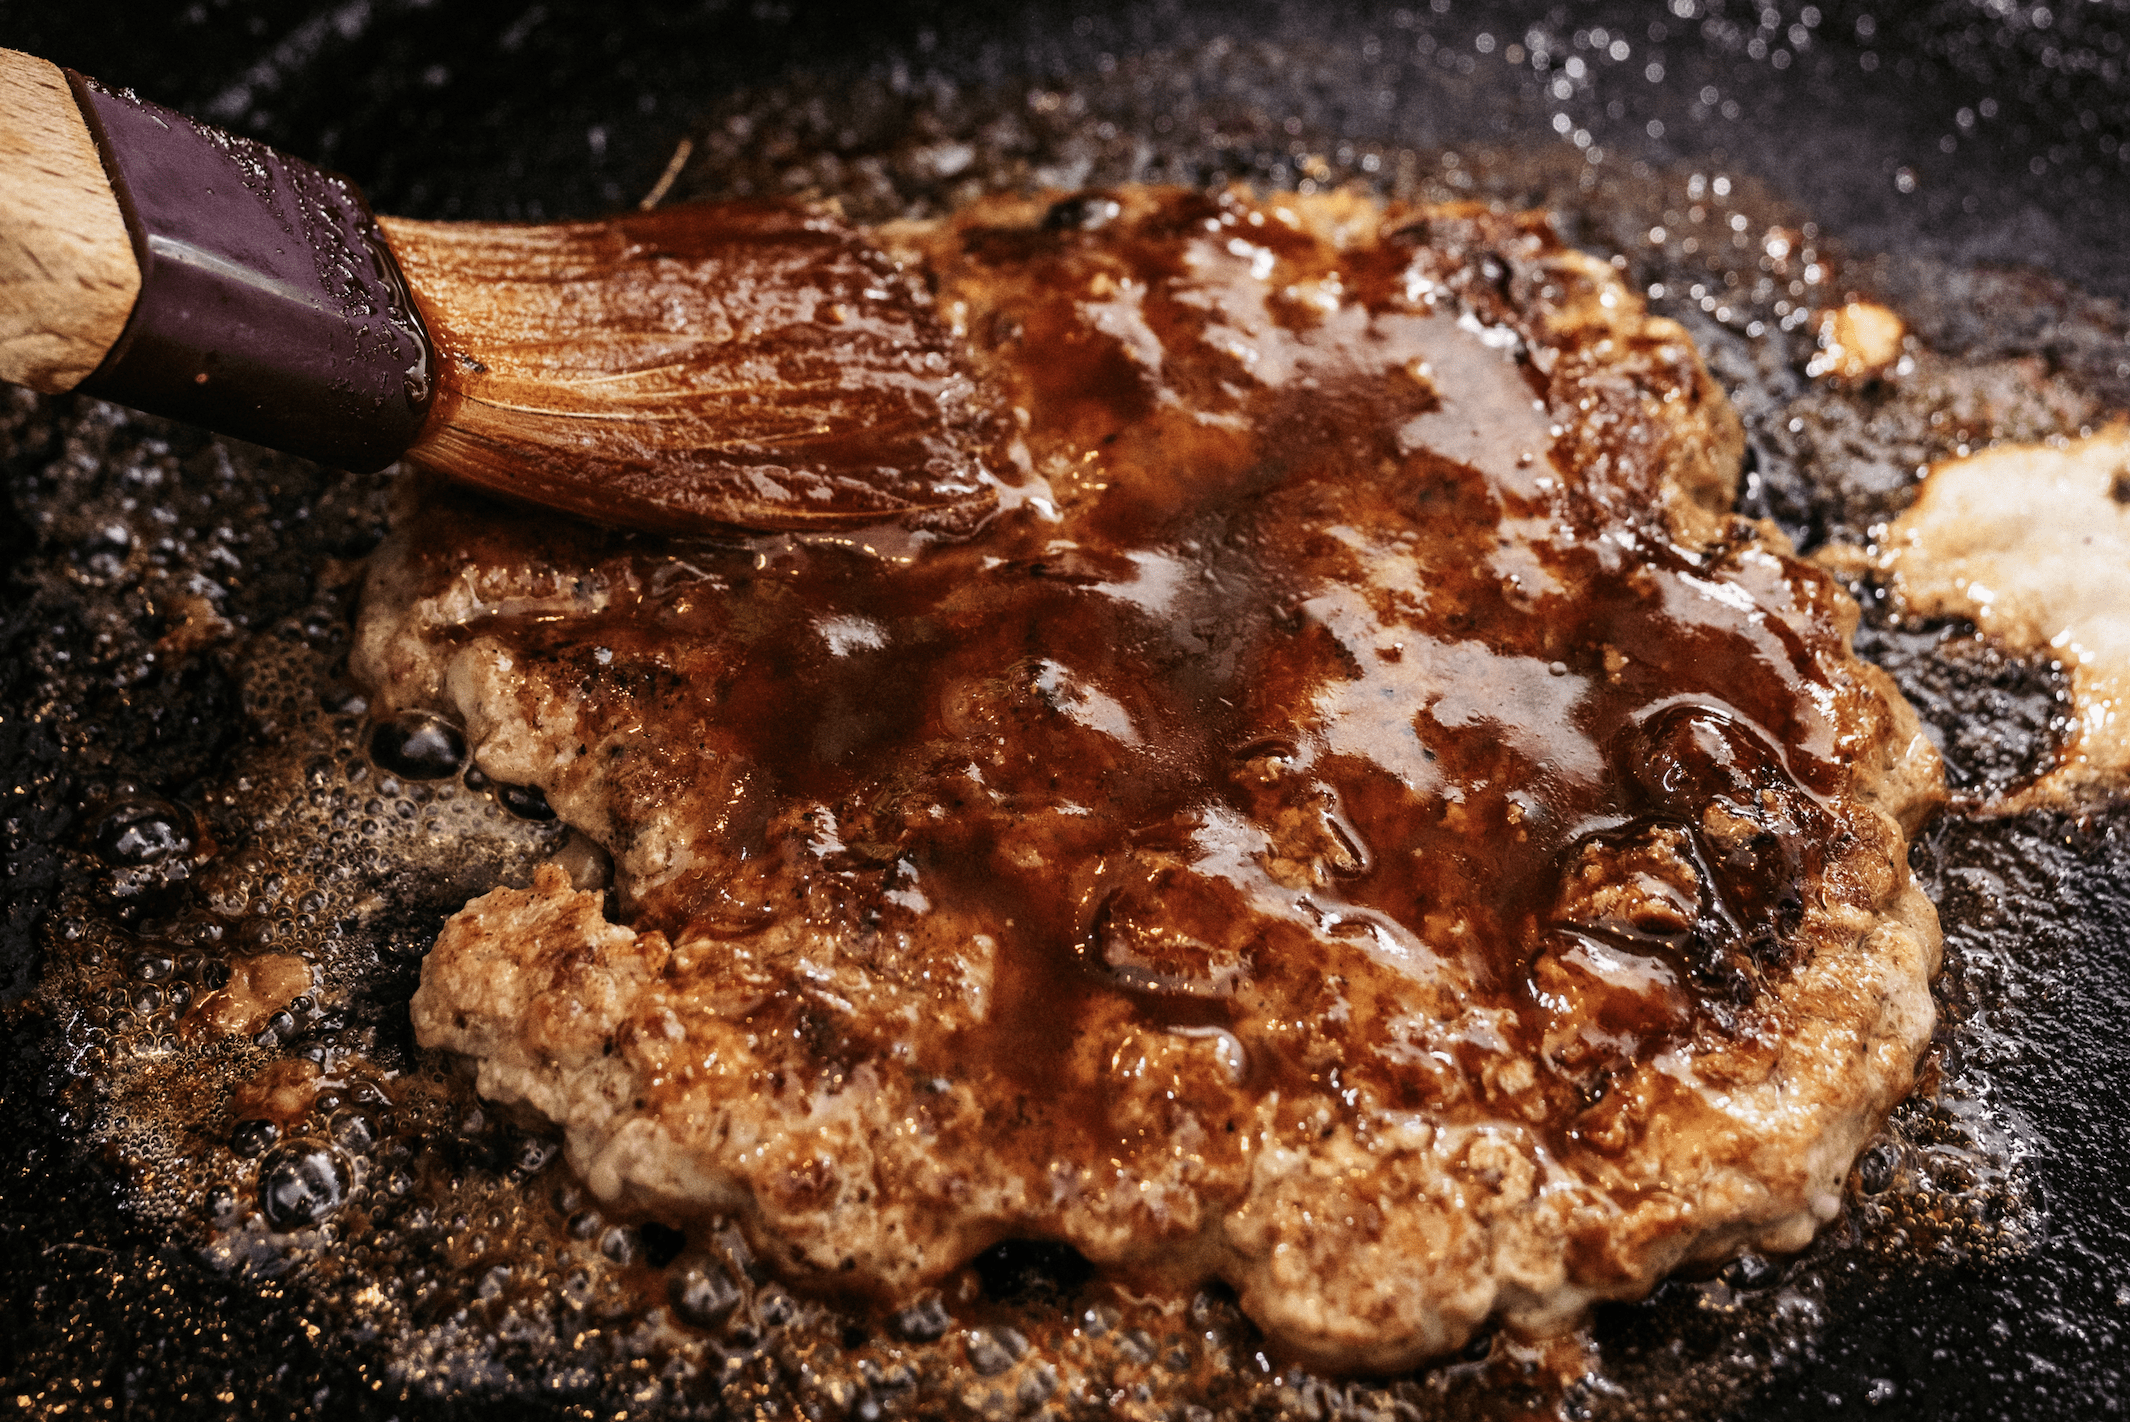 Root beer BBQ sauce being spread on a burger